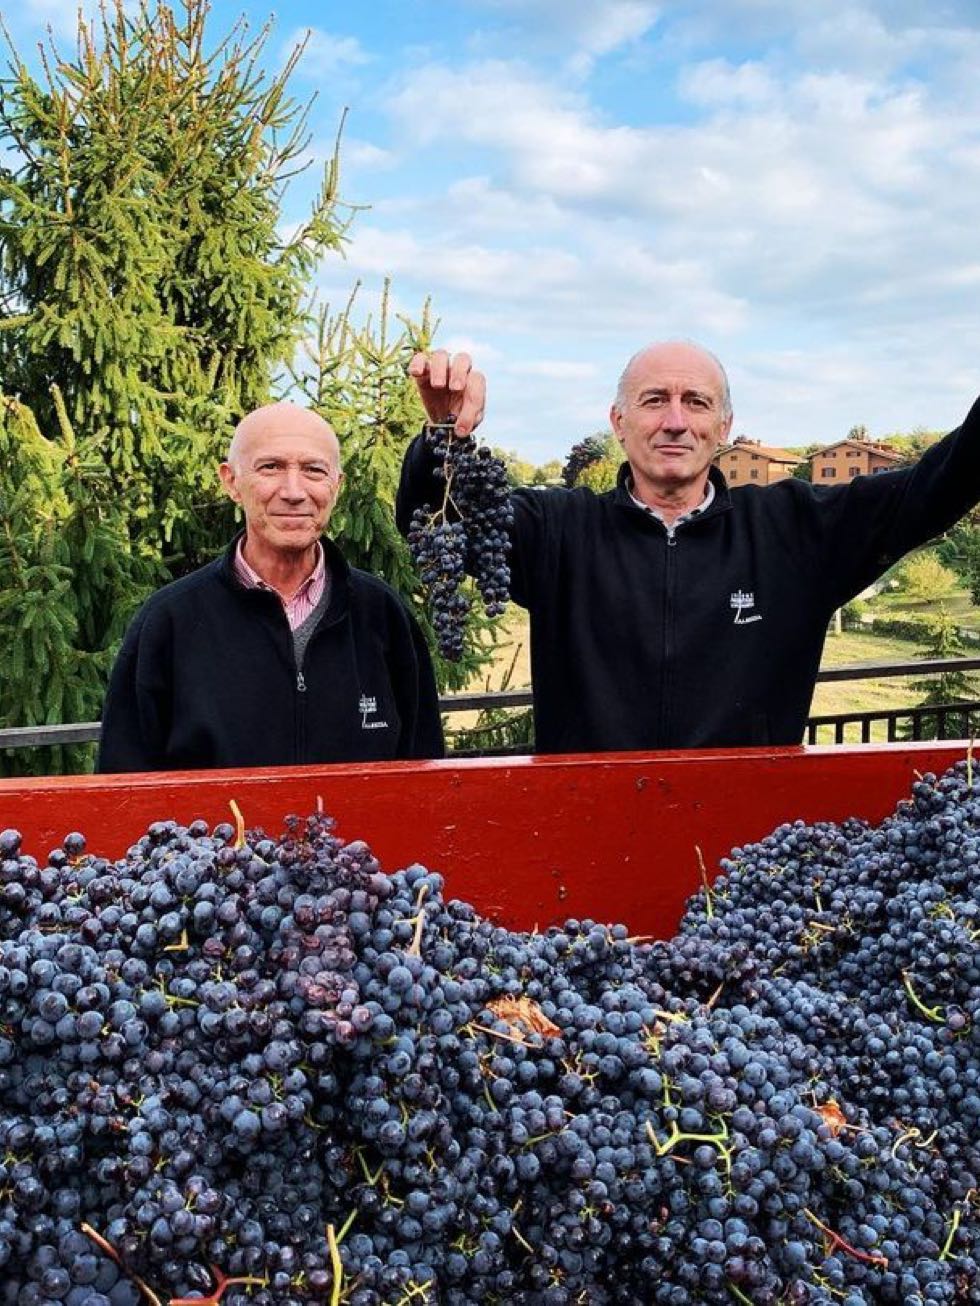 Valter and Paolo with grapes